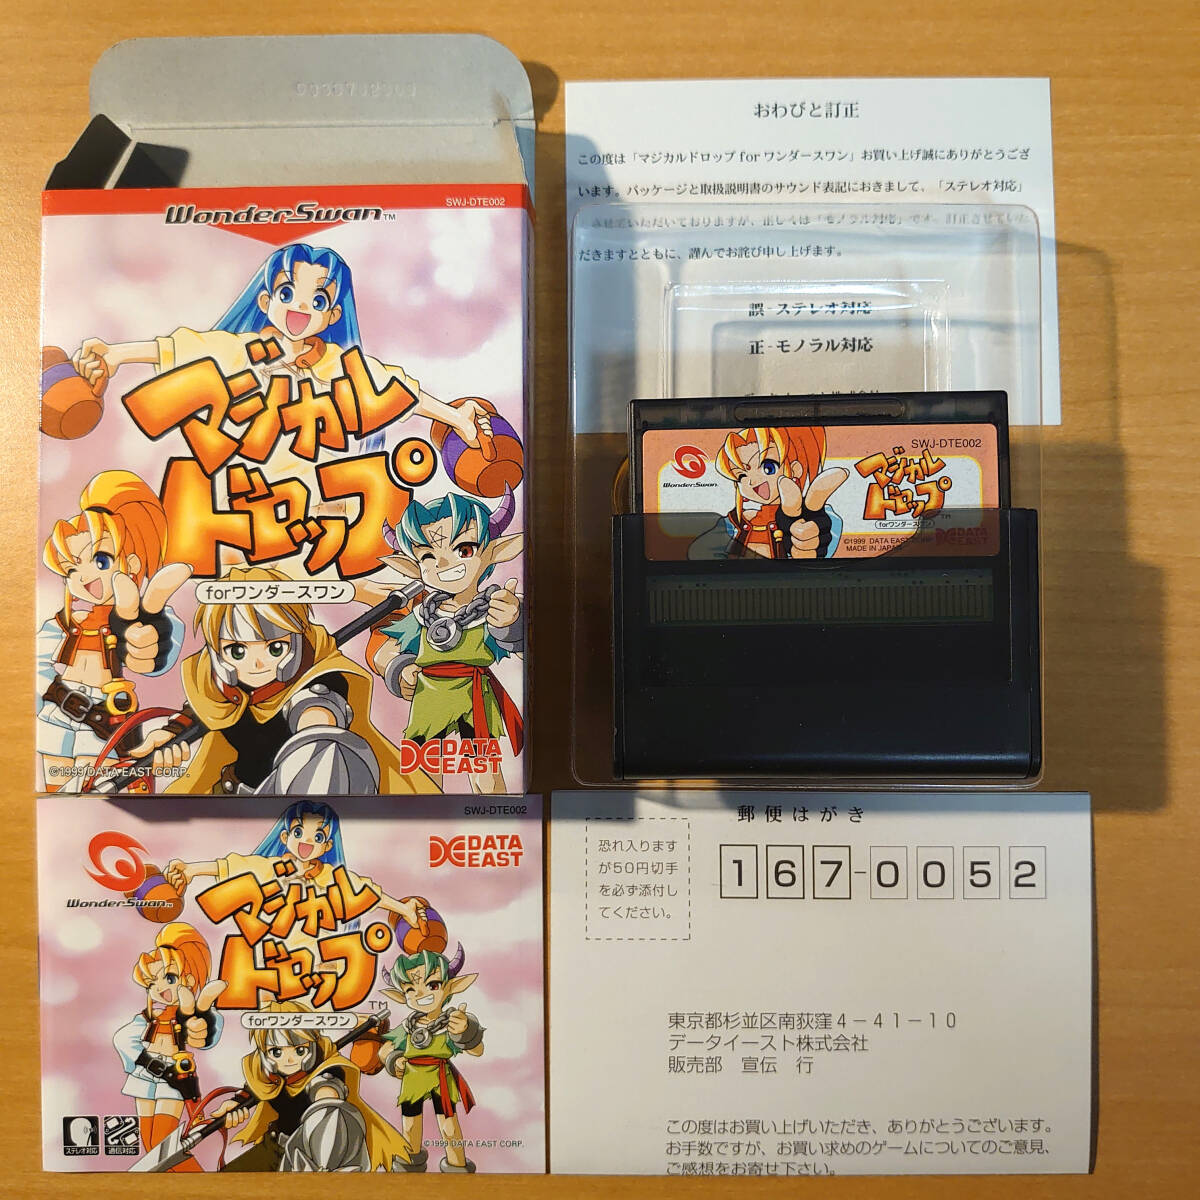  magical Drop data East V WonderSwan soft V start-up has confirmed used beautiful goods V box * instructions equipped V addition postage . including in a package possible *18